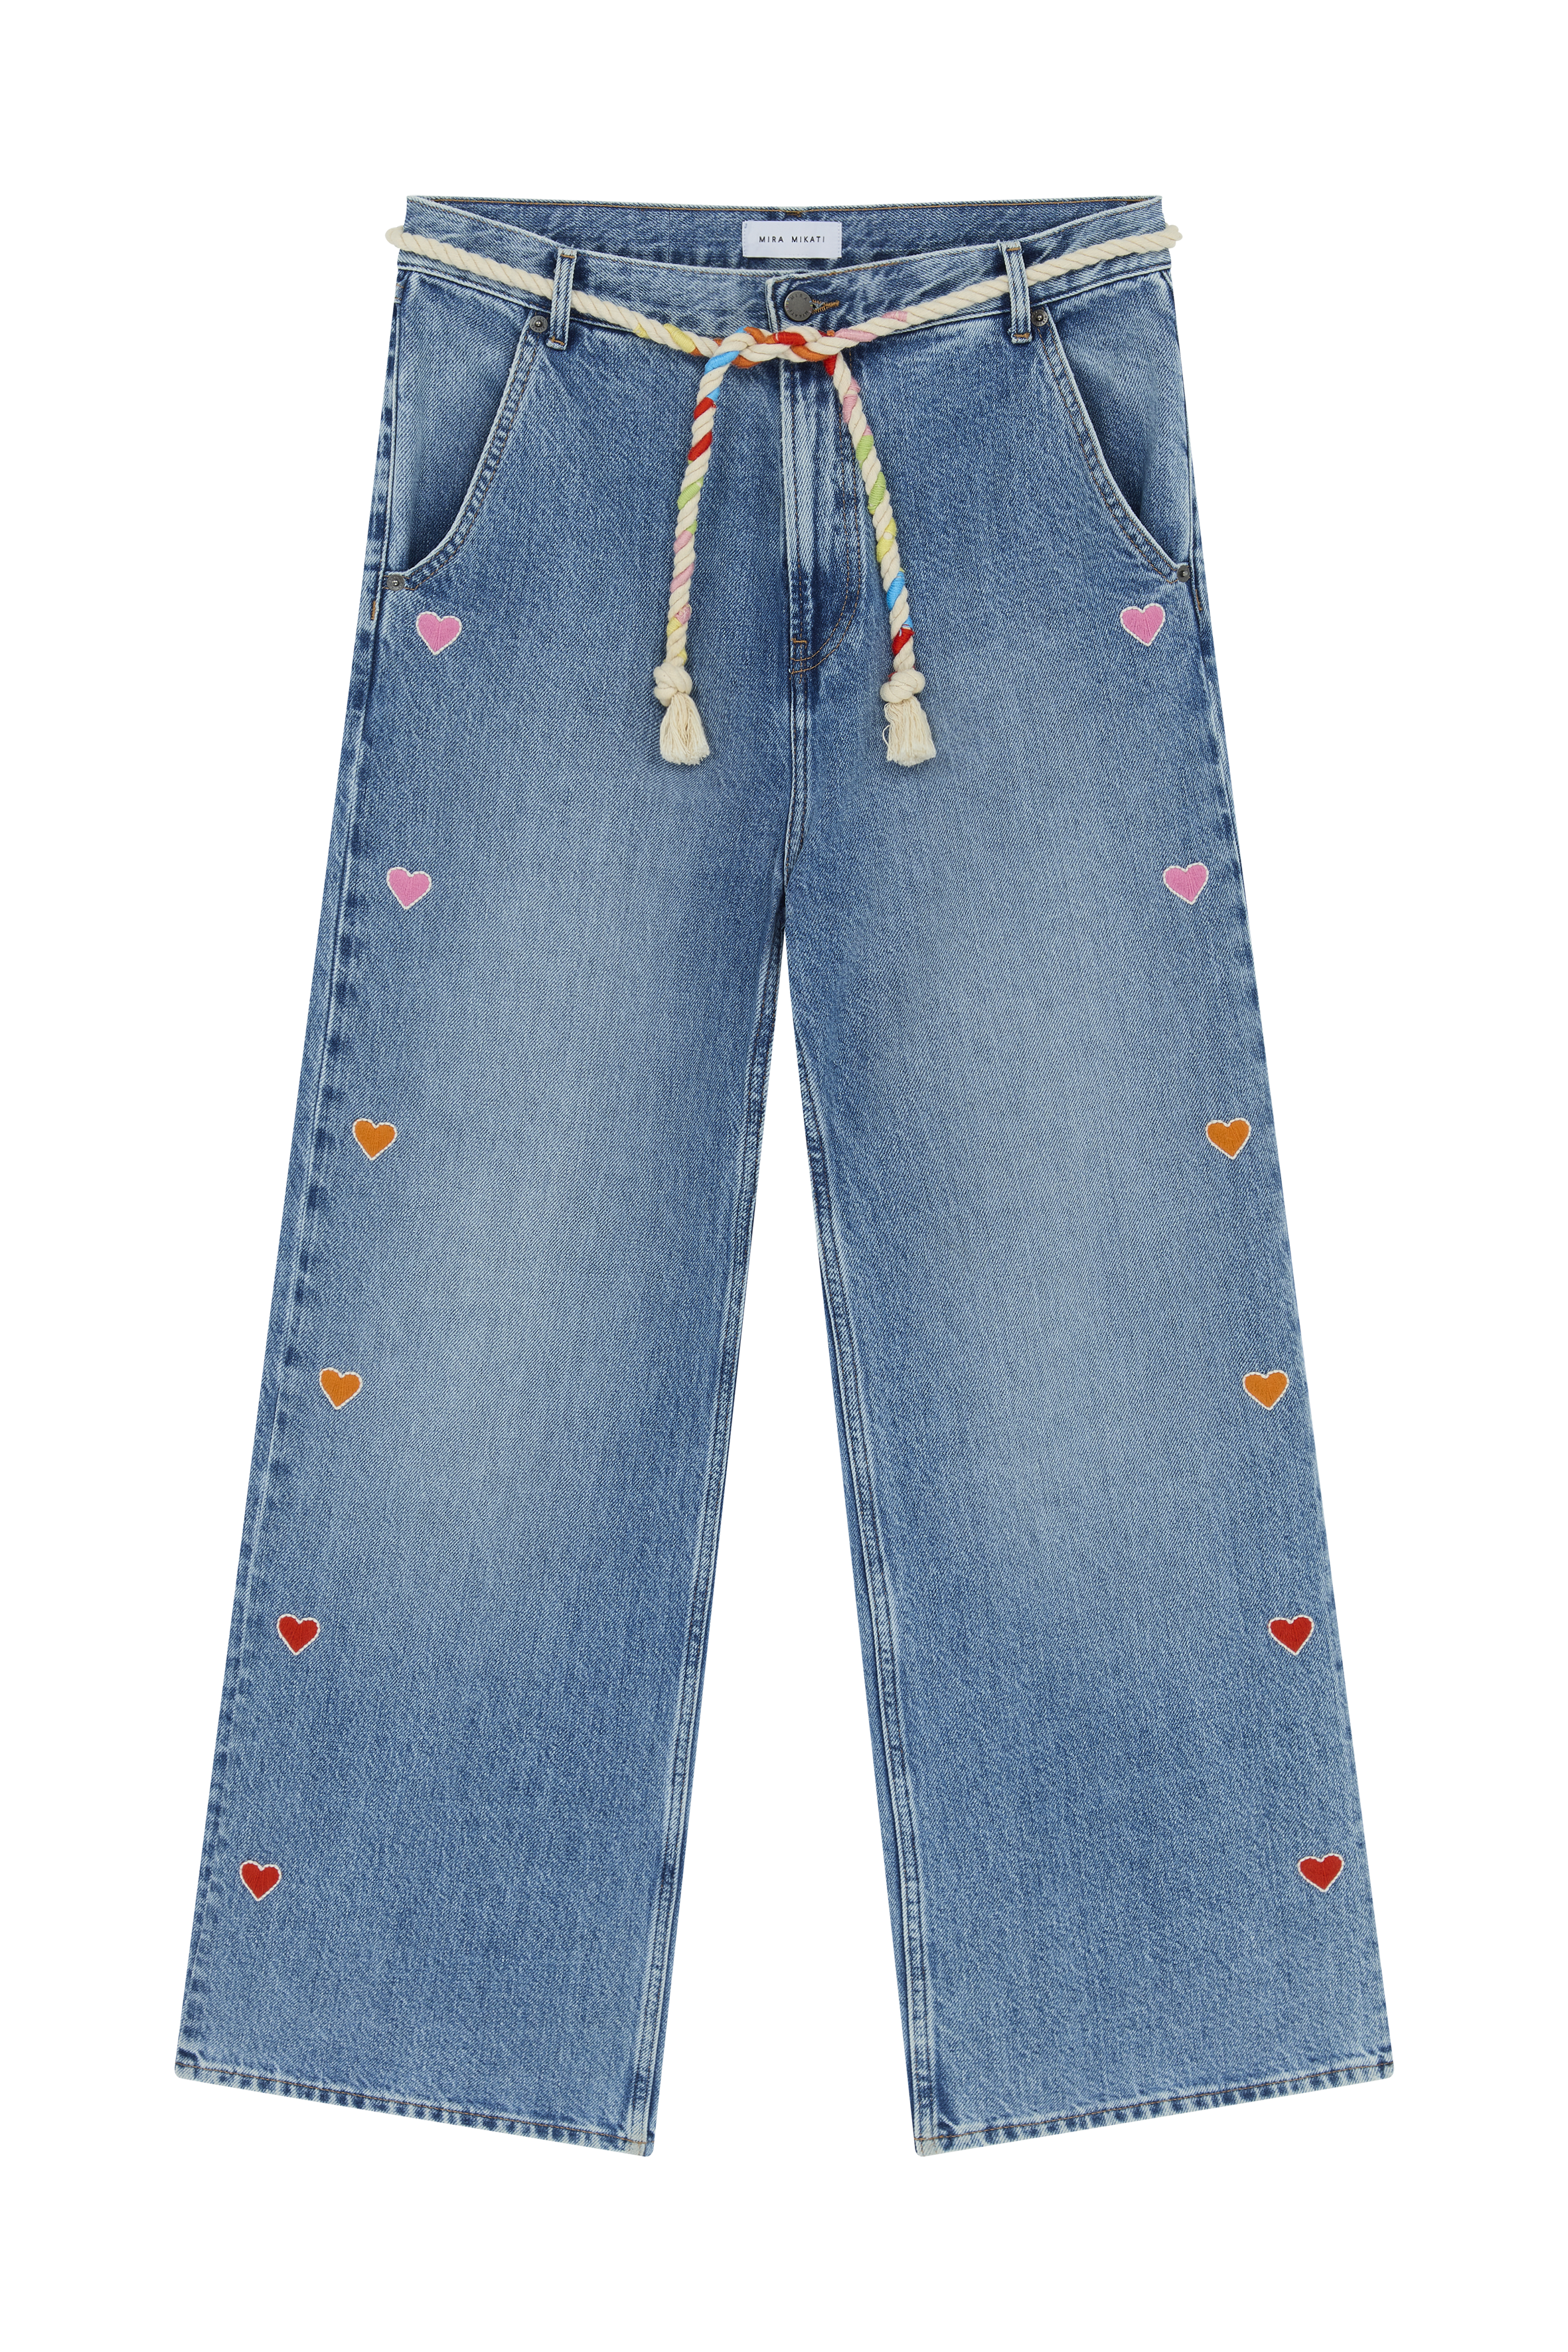 Embroidered Heart Jeans 